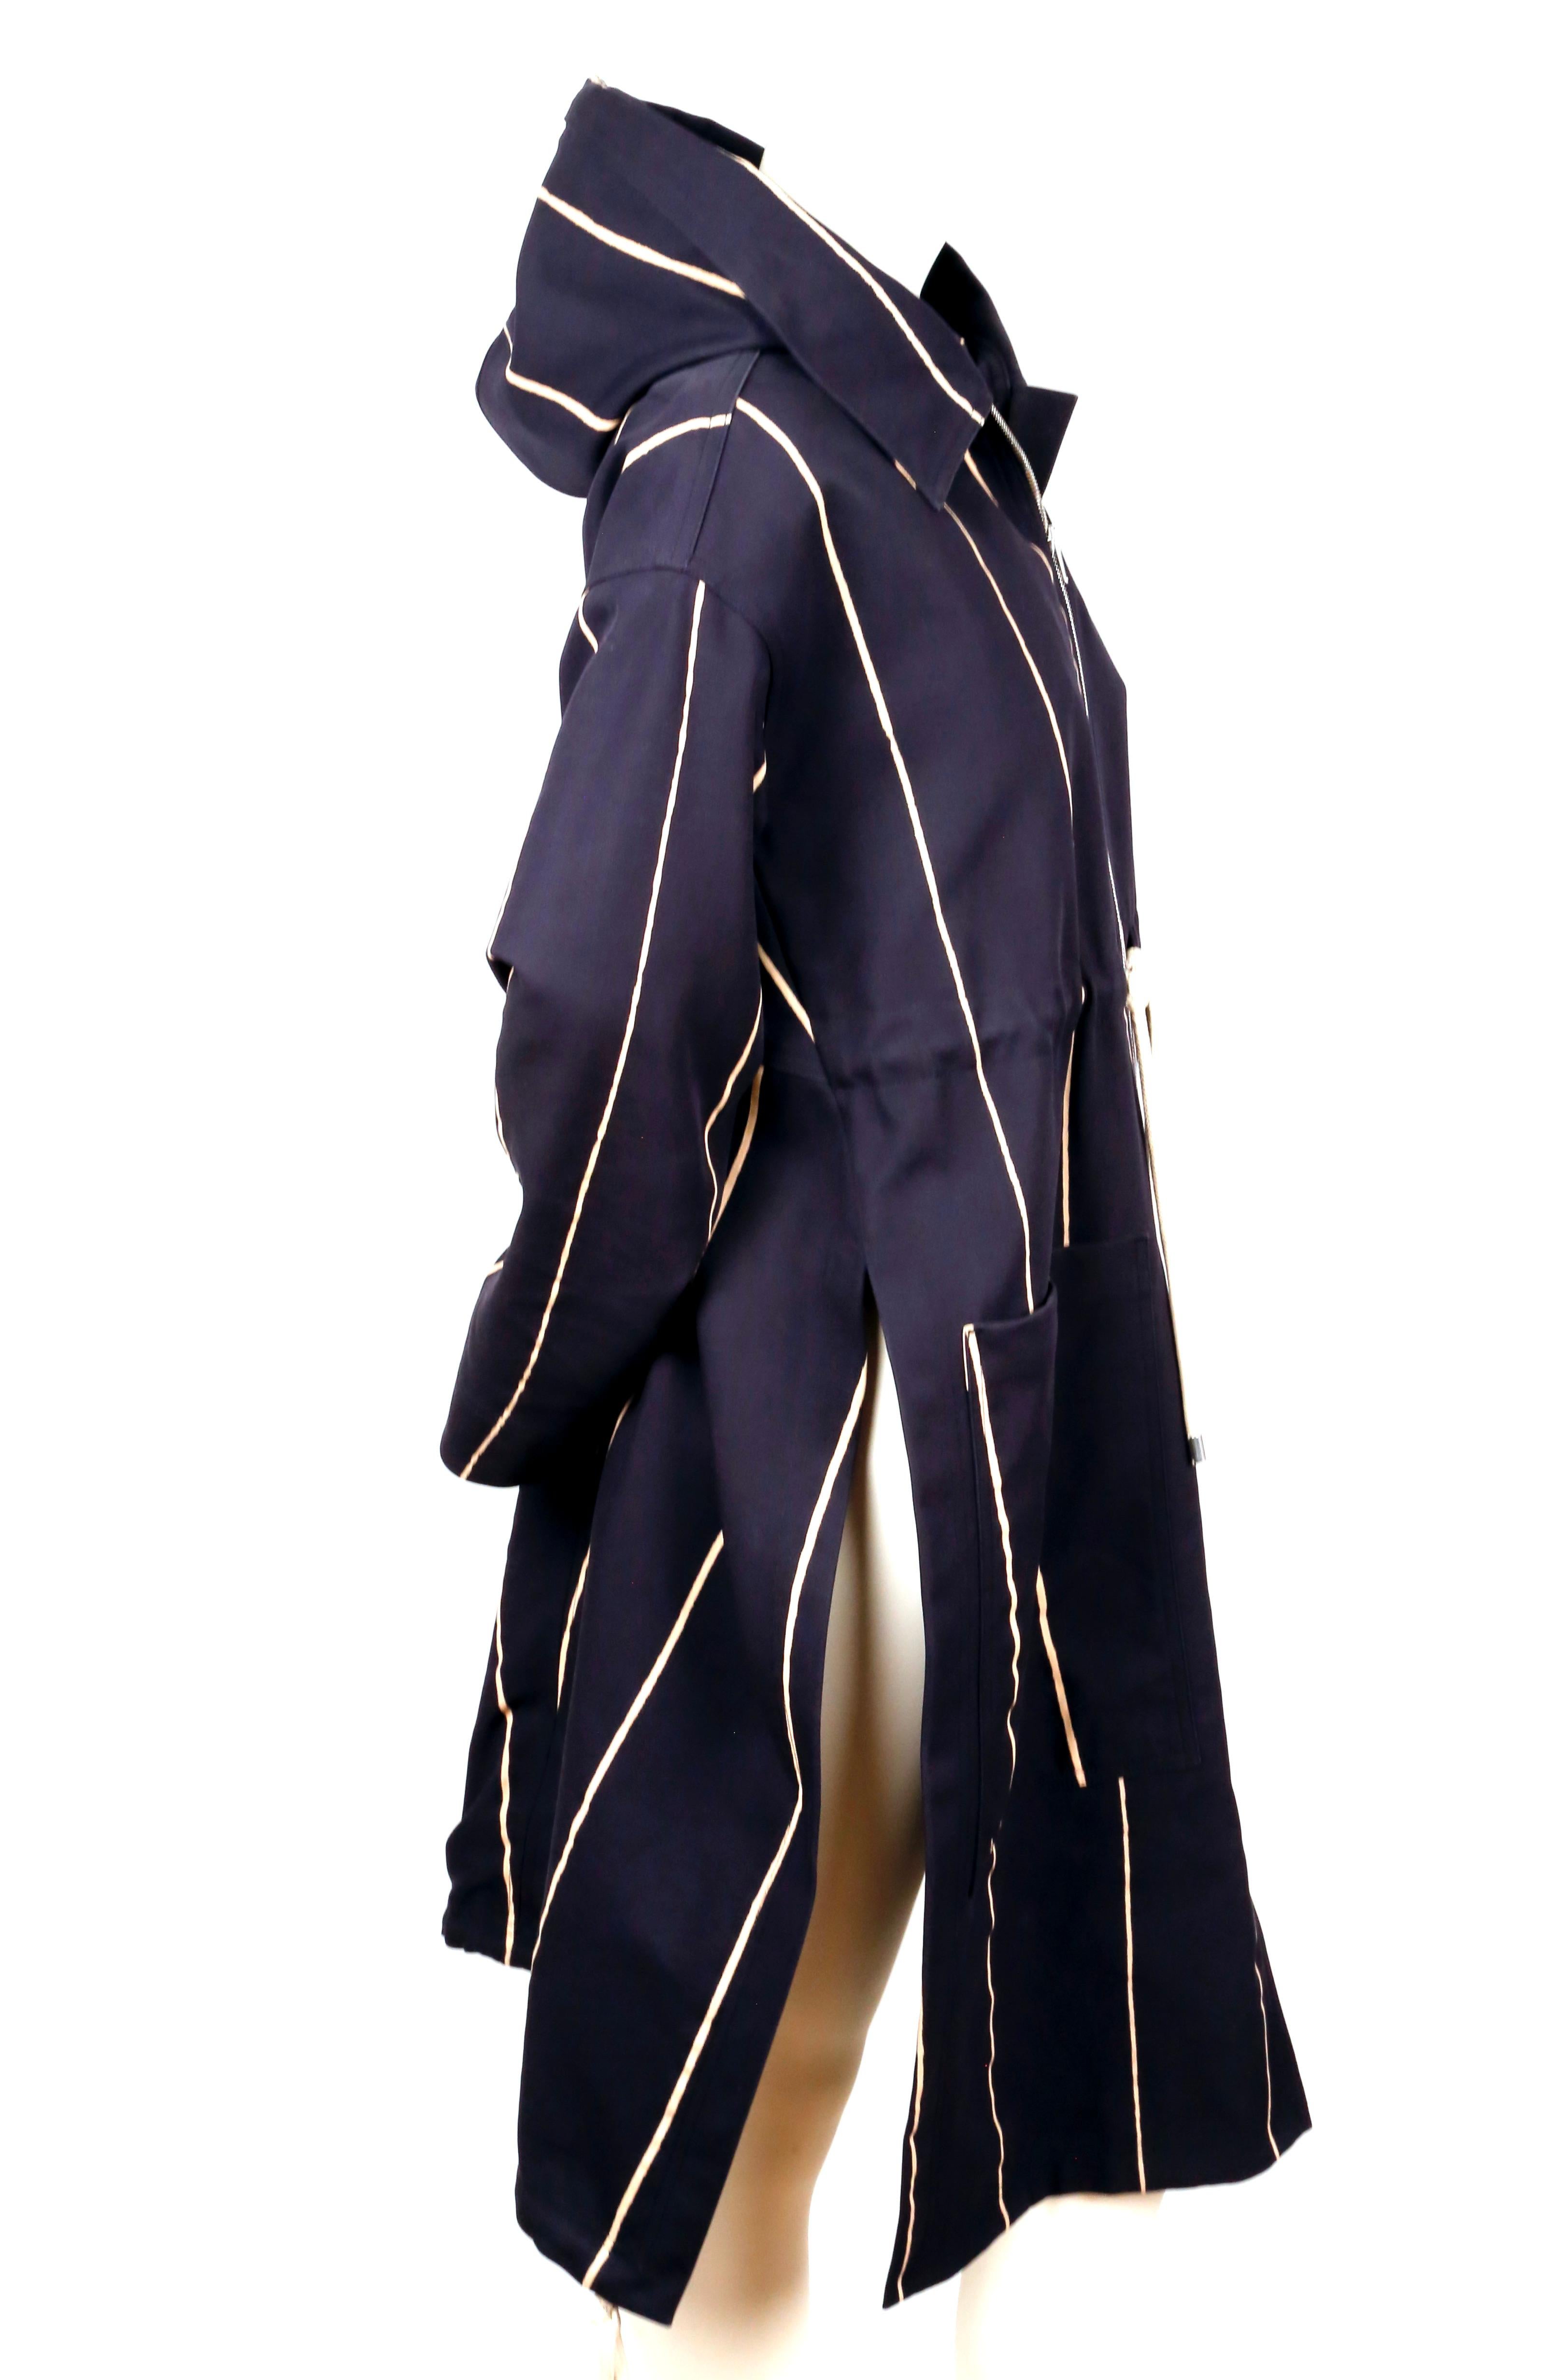 Oversized navy and off-white striped coat with hood designed by Phoebe Philo for Celine dating to resort of 2016. French size 34 however this coat has a very oversized fit. Approximate measurements: drop shoulder 22